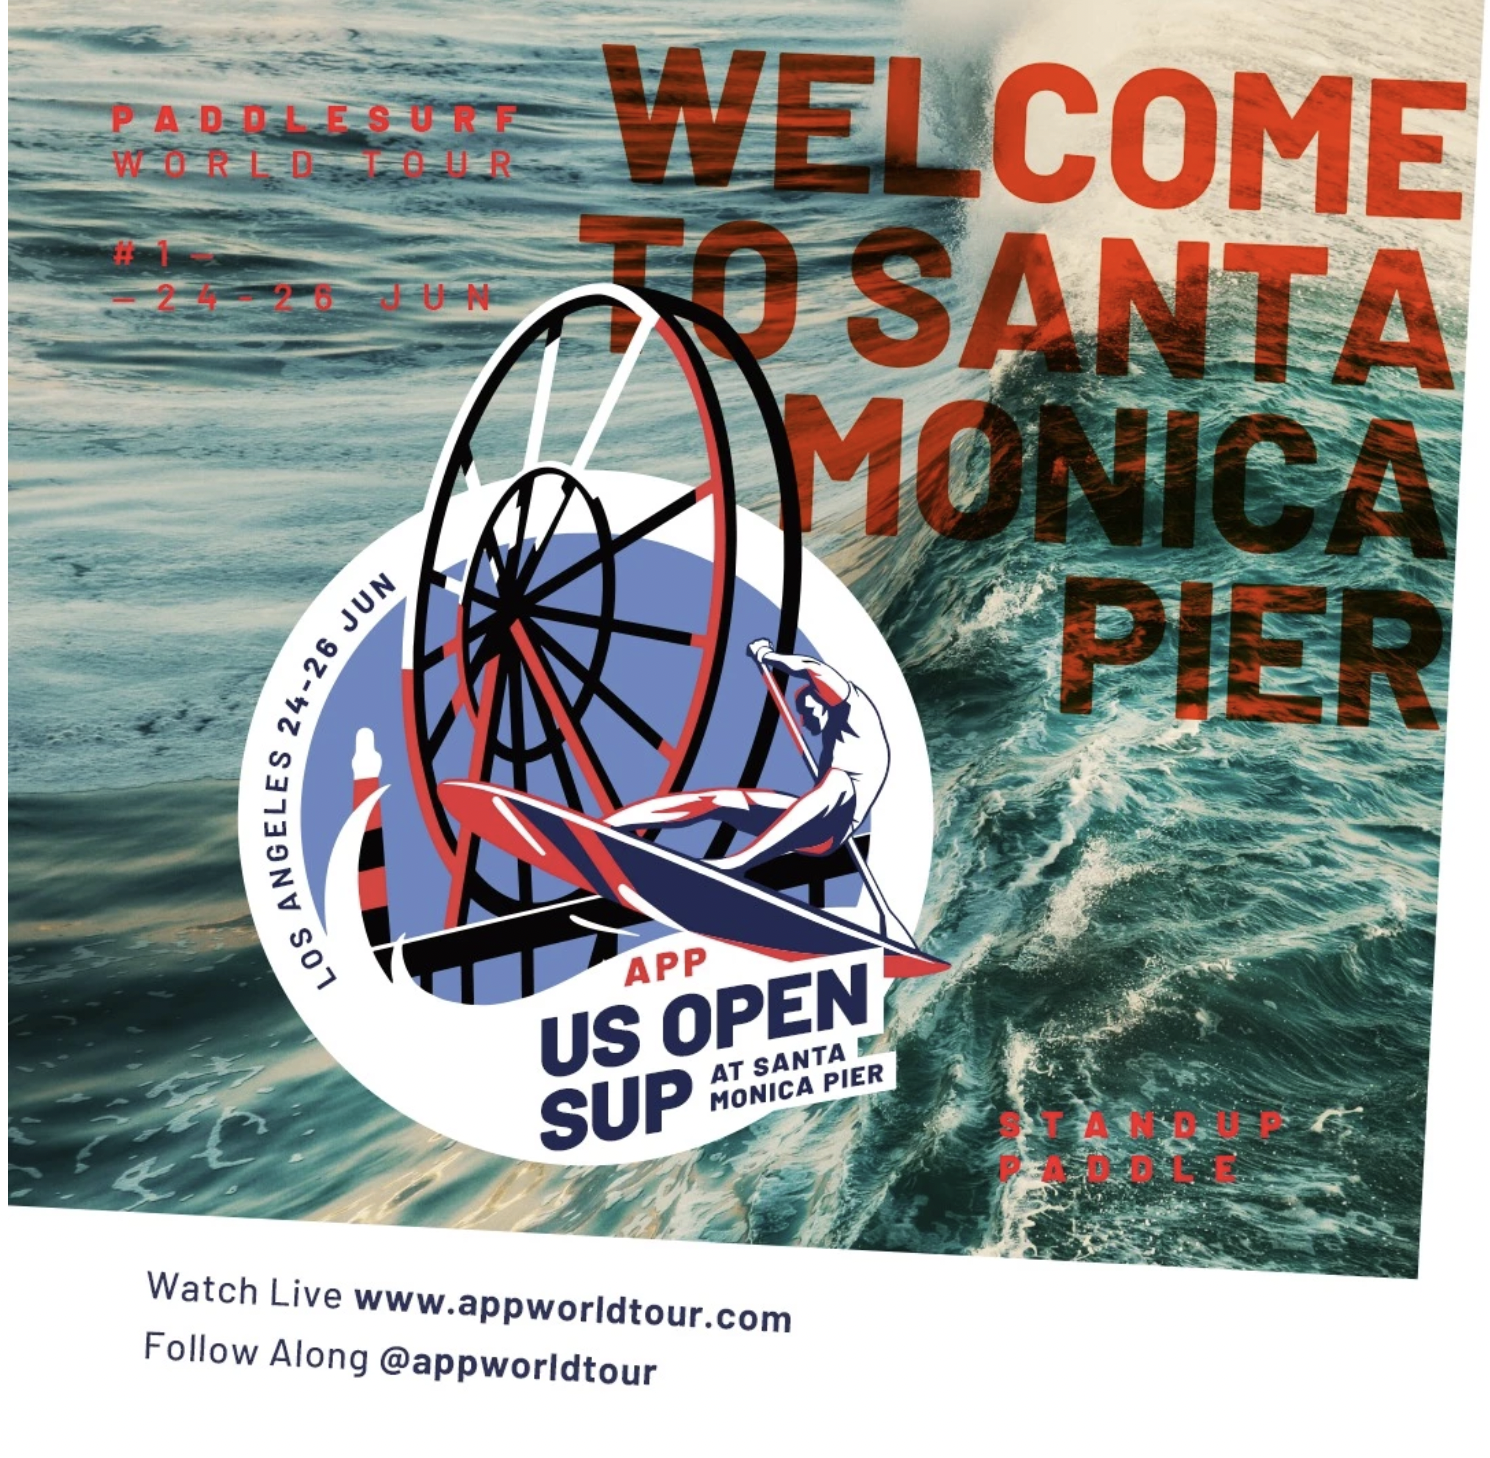 US Open of SUP (Paddlesurf World Tour Event)